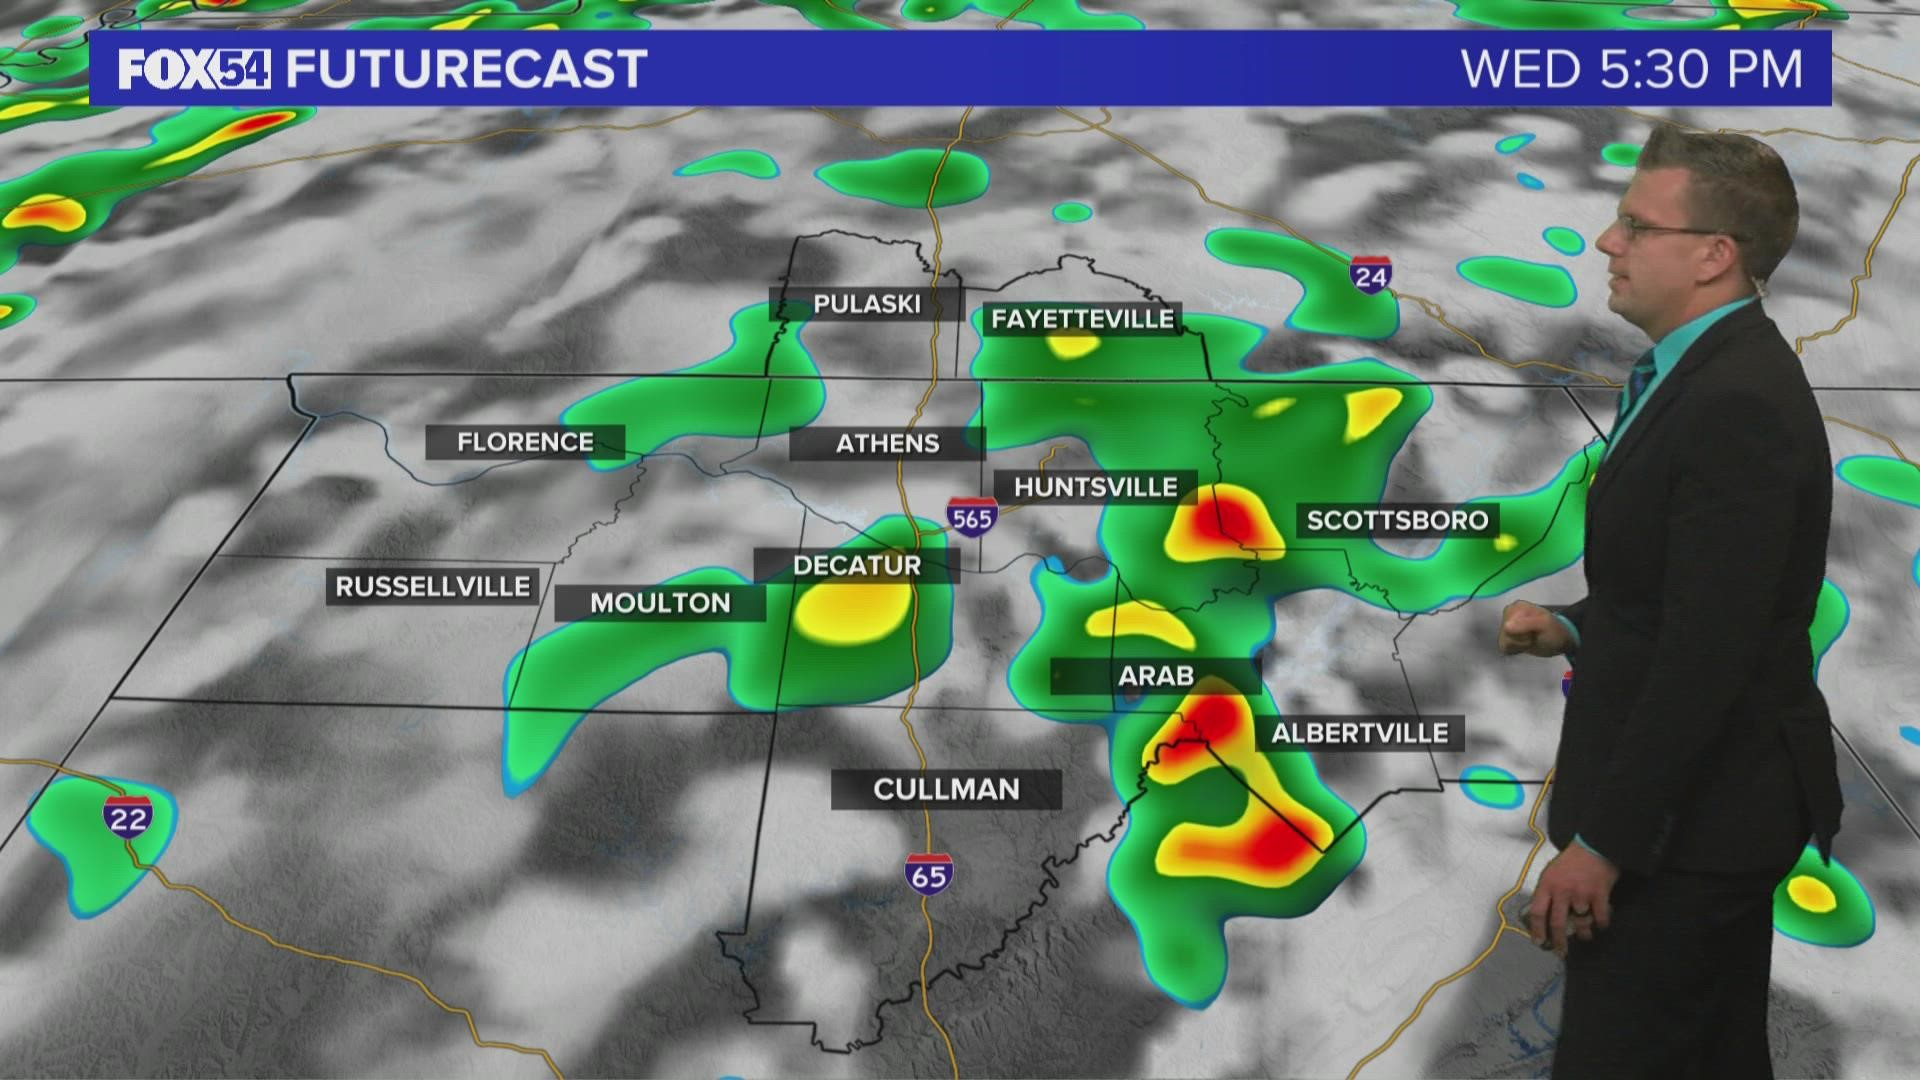 Showers and thunderstorms stay in the forecast through Wednesday Afternoon